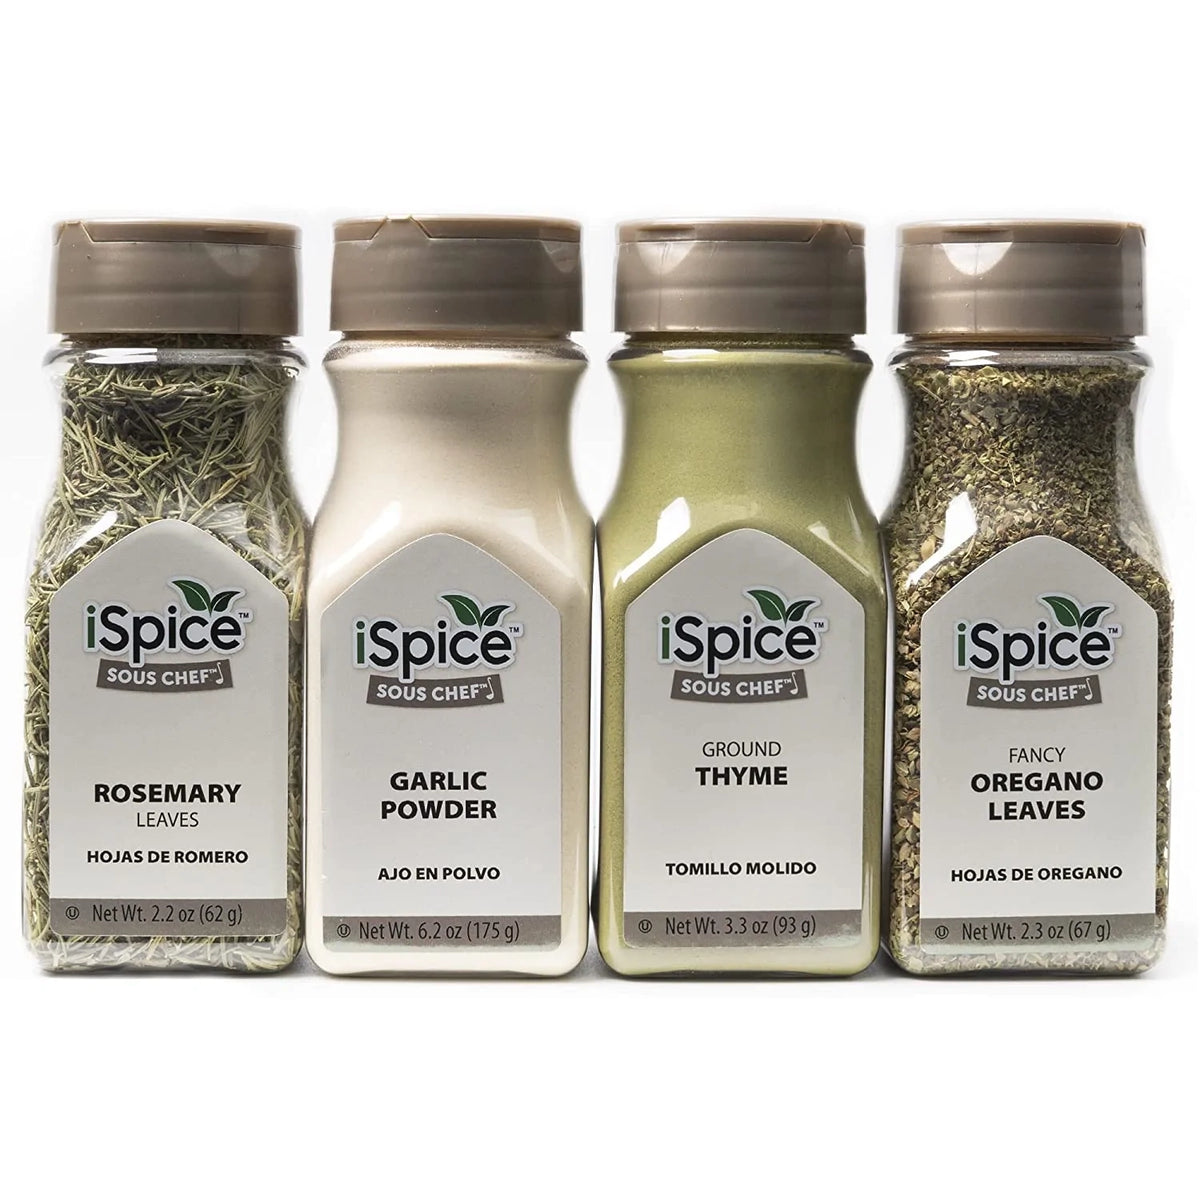 iSpice Spices and Seasonings Sets Starter Kitchen Spices Set for Cooking -  Spices Variety Pack Herb, Spice & Seasoning Gifts Home Basic Spice Set | 24